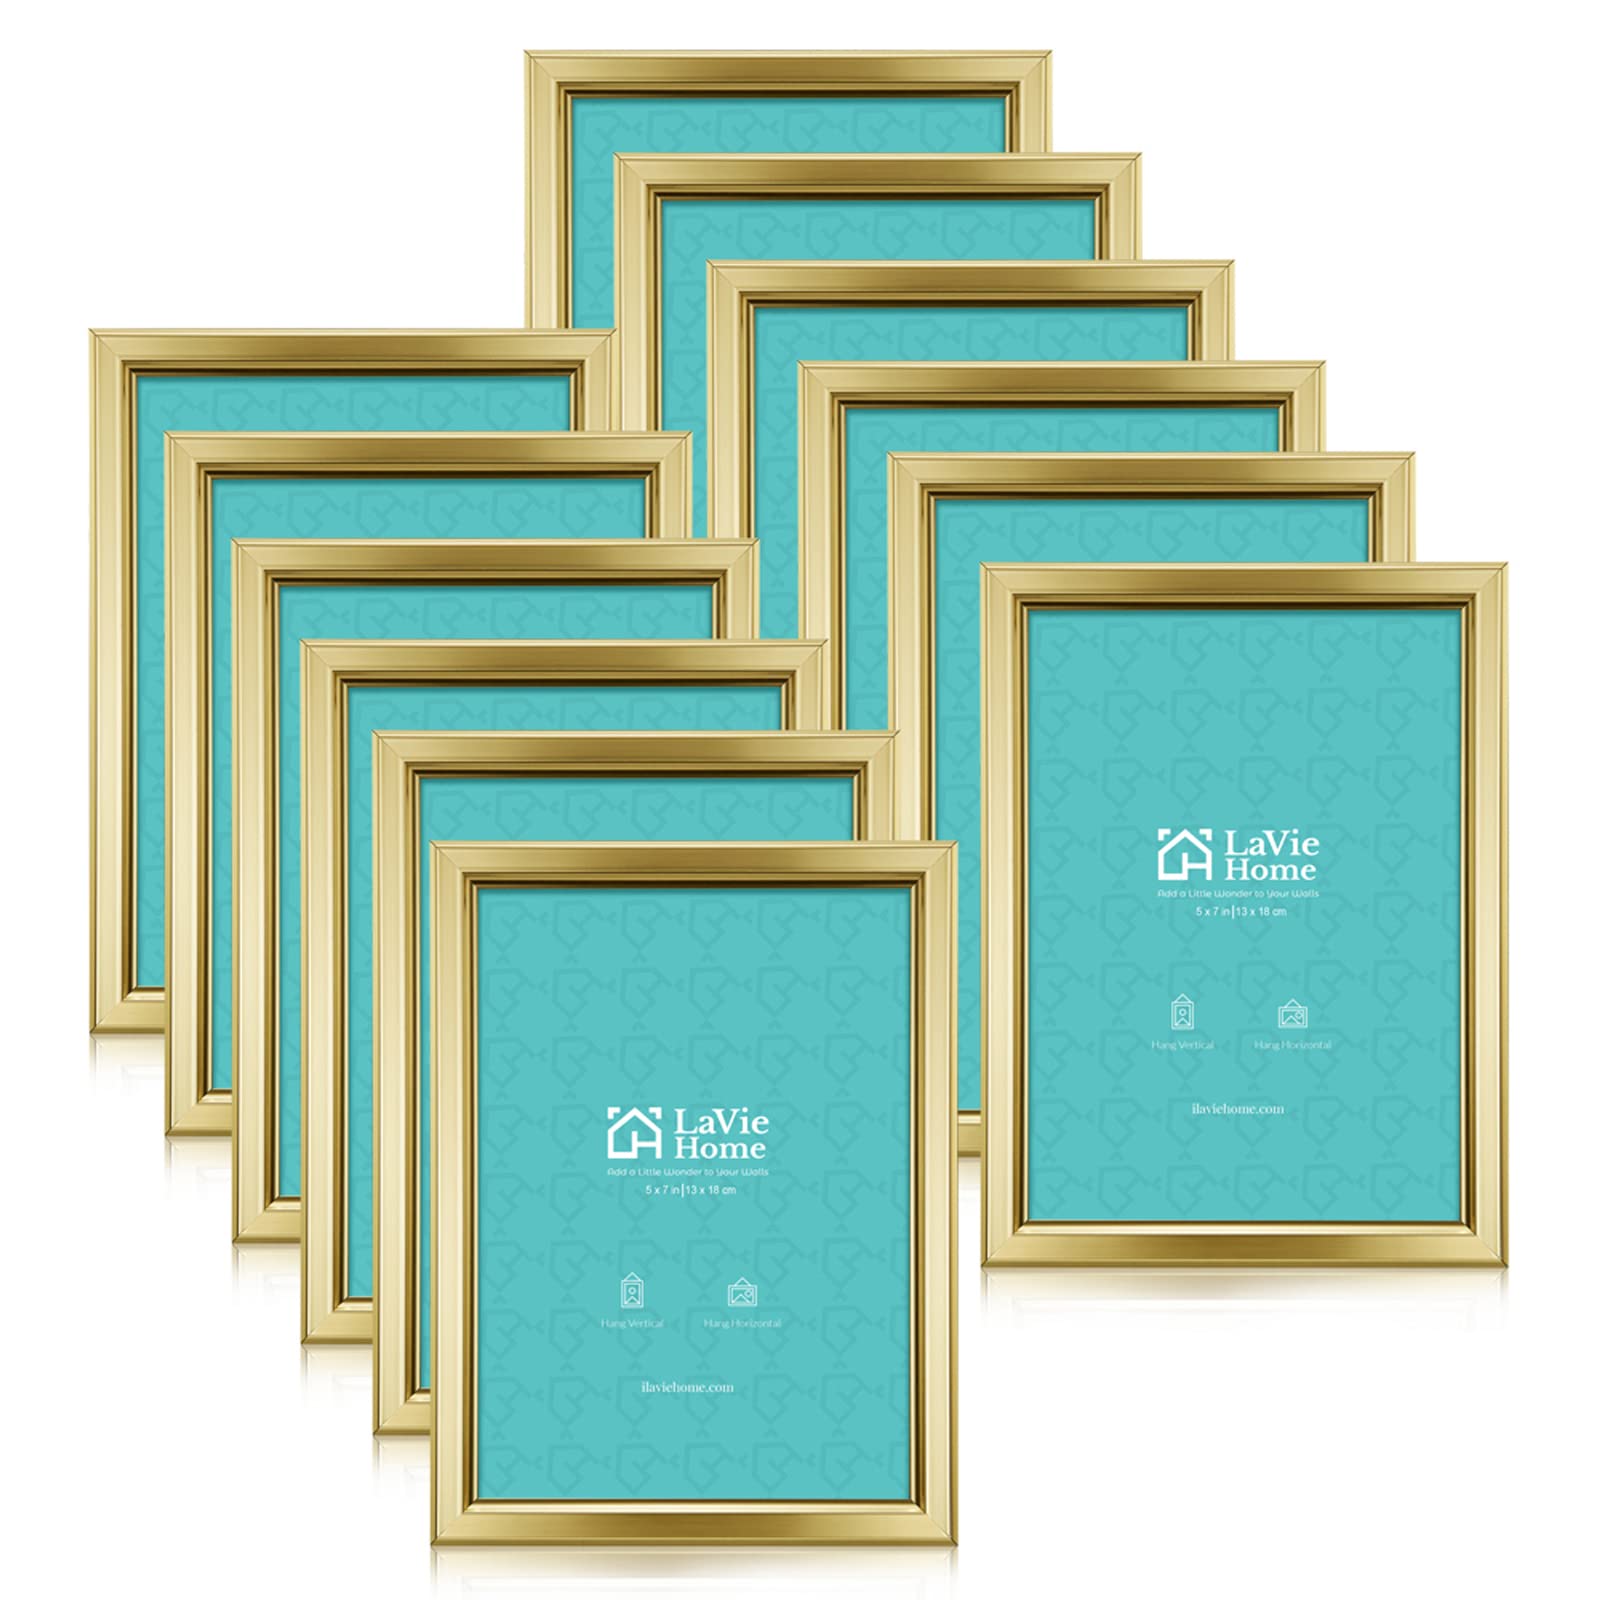 LaVie Home 5x7 Picture Frames (12 Pack, Gold) Simple Designed Photo Frame with High Definition Glass for Wall Mount & Table Top Display, Set of 12 ...